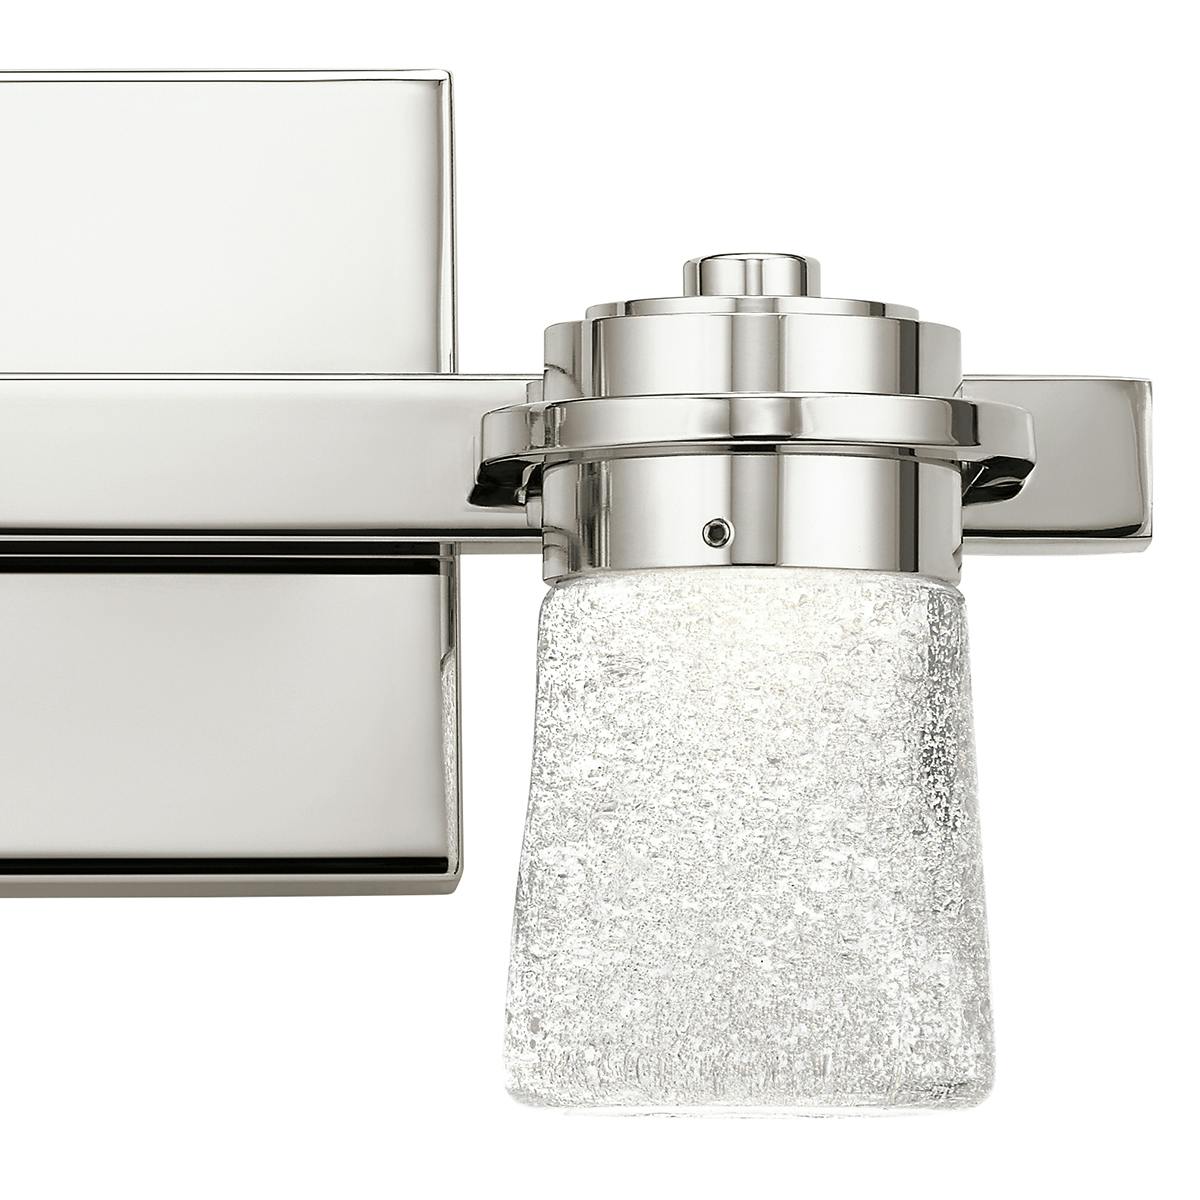 Close up view of the Vada 3000K 2 Light Vanity Light Nickel on a white background